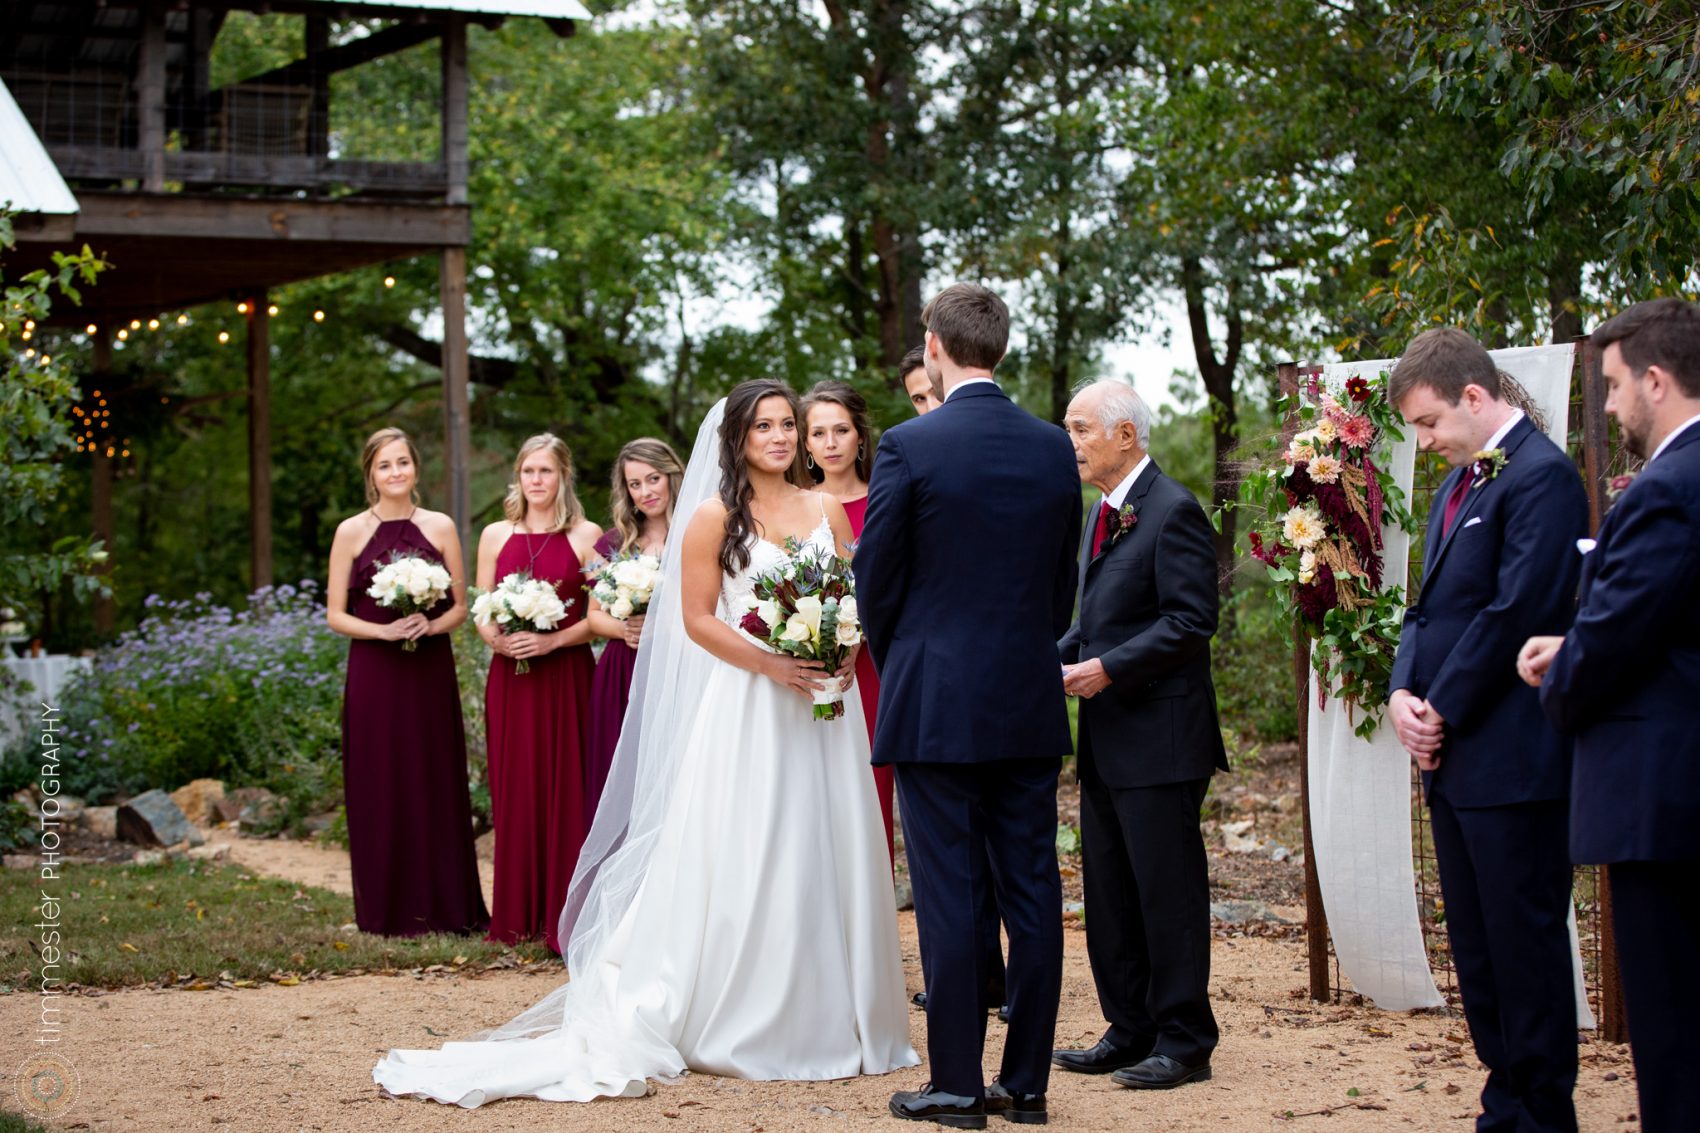 An outdoor wedding ceremony in the fall at Sassafras Fork Farm.